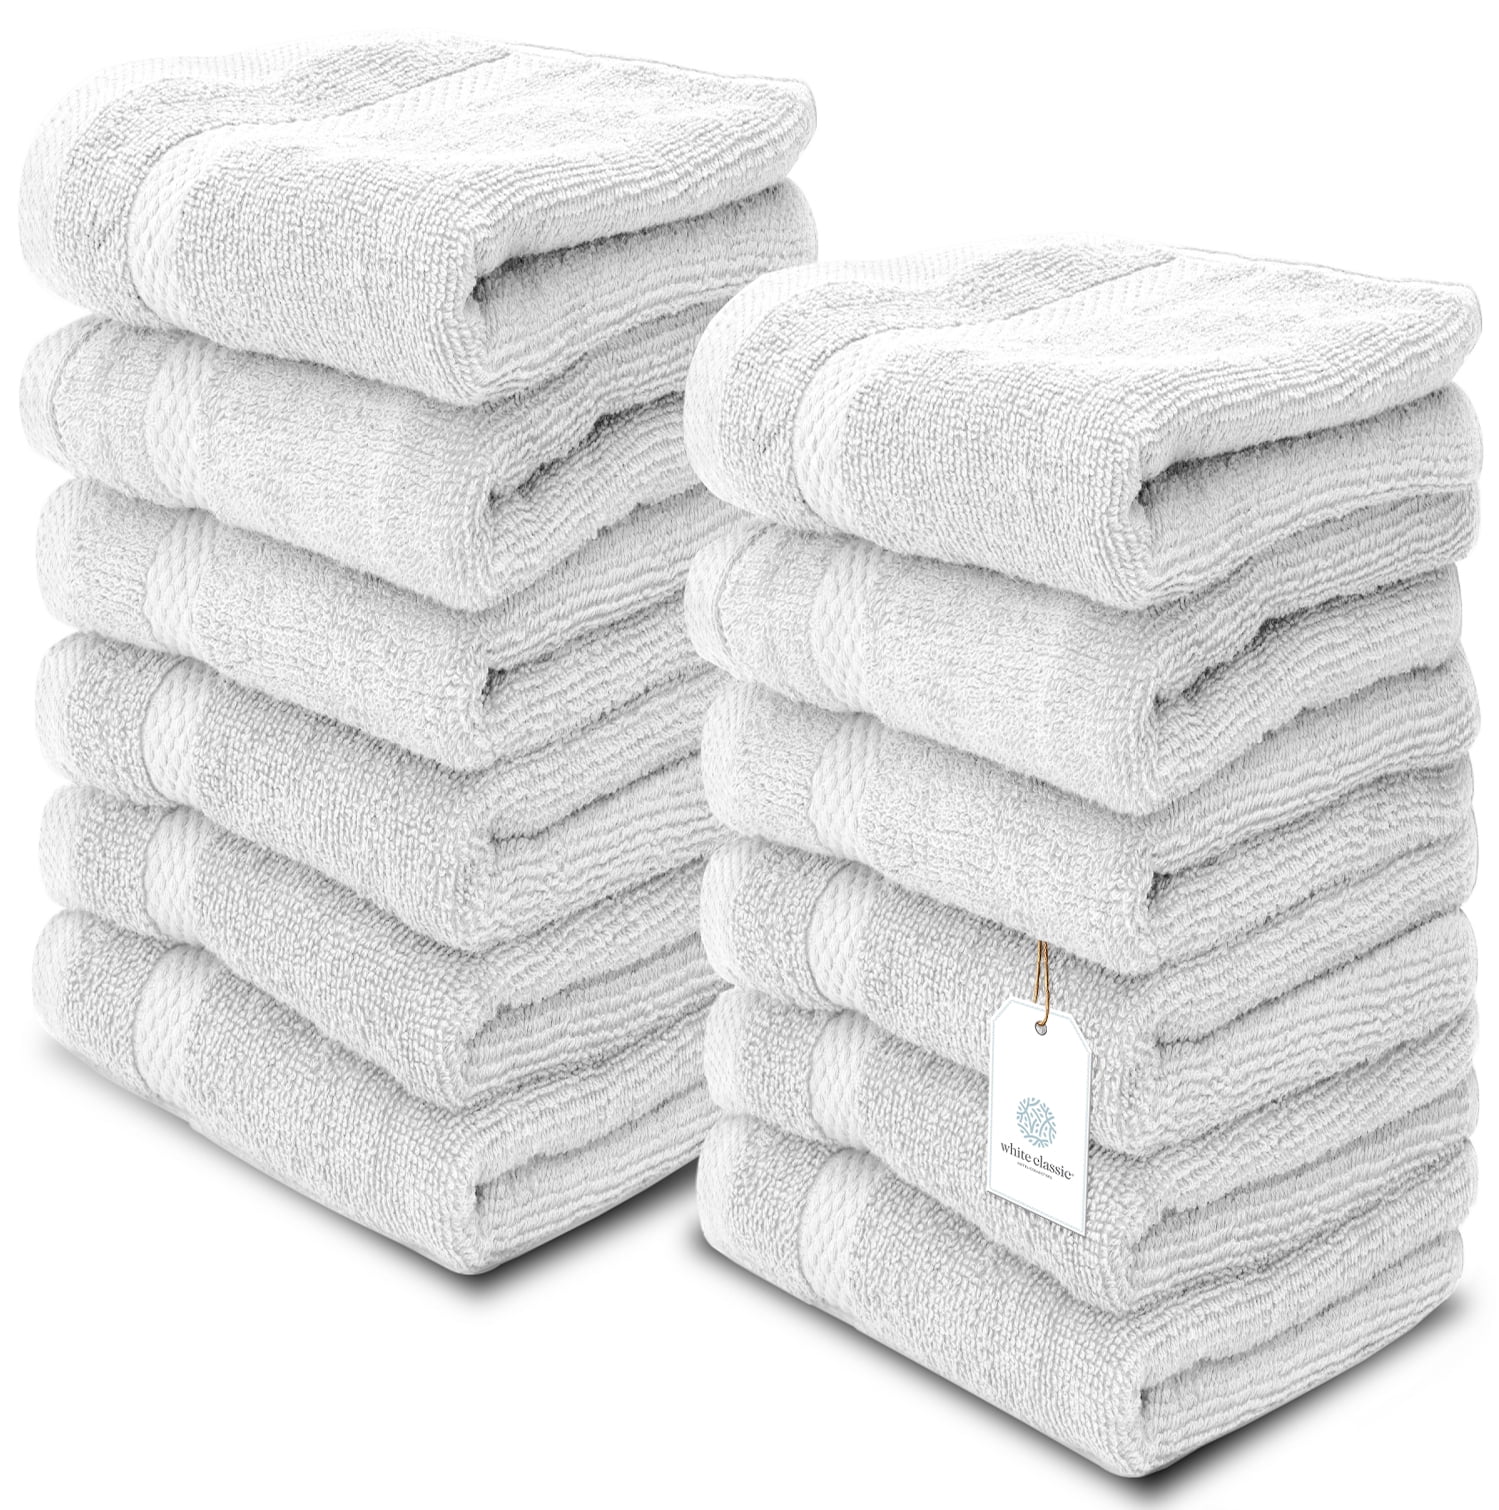 WhiteClassic  Cotton Washcloths Light Blue 12/Pack 13x13 Hotel Face Towel 